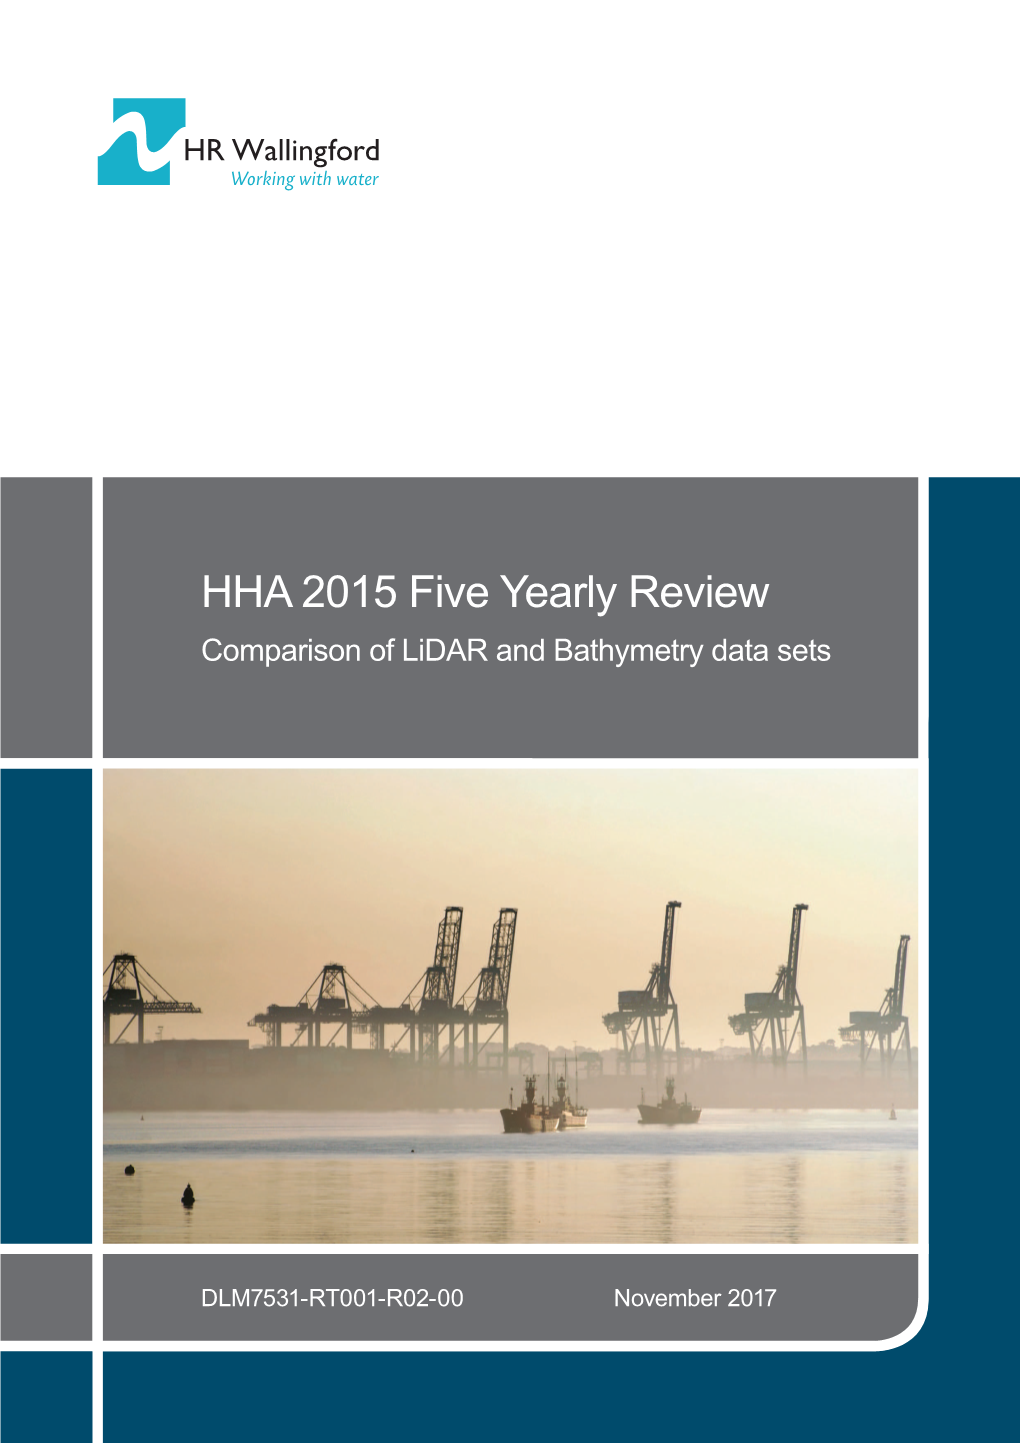 HHA 2015 Five Yearly Review Comparison of Lidar and Bathymetry Data Sets